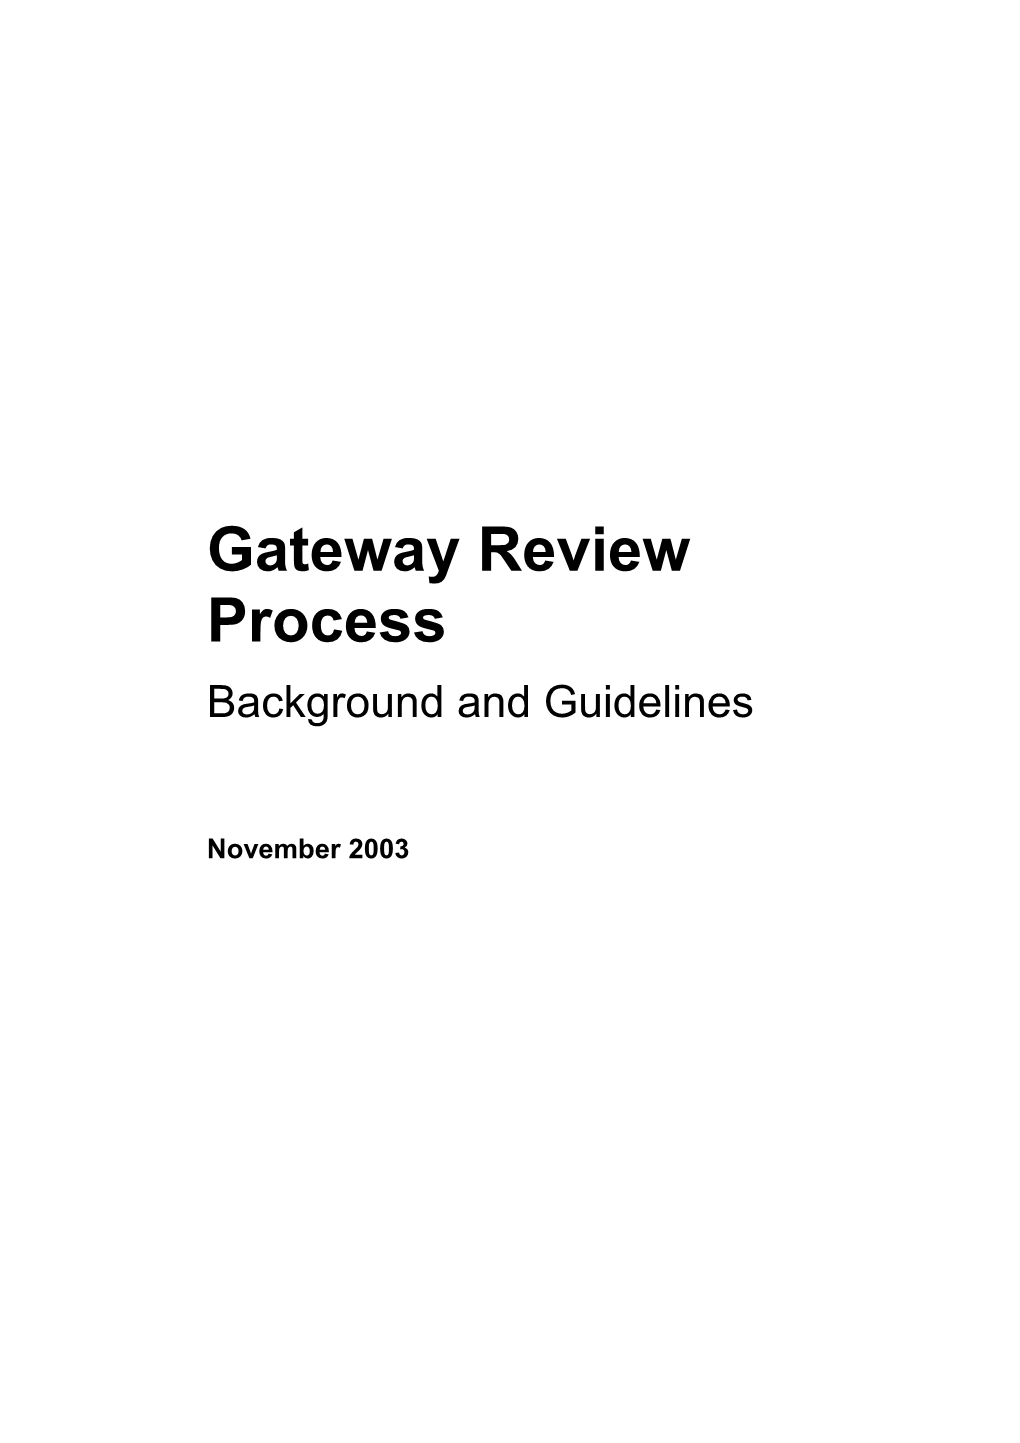 Gateway Review Process: Background and Guidelines